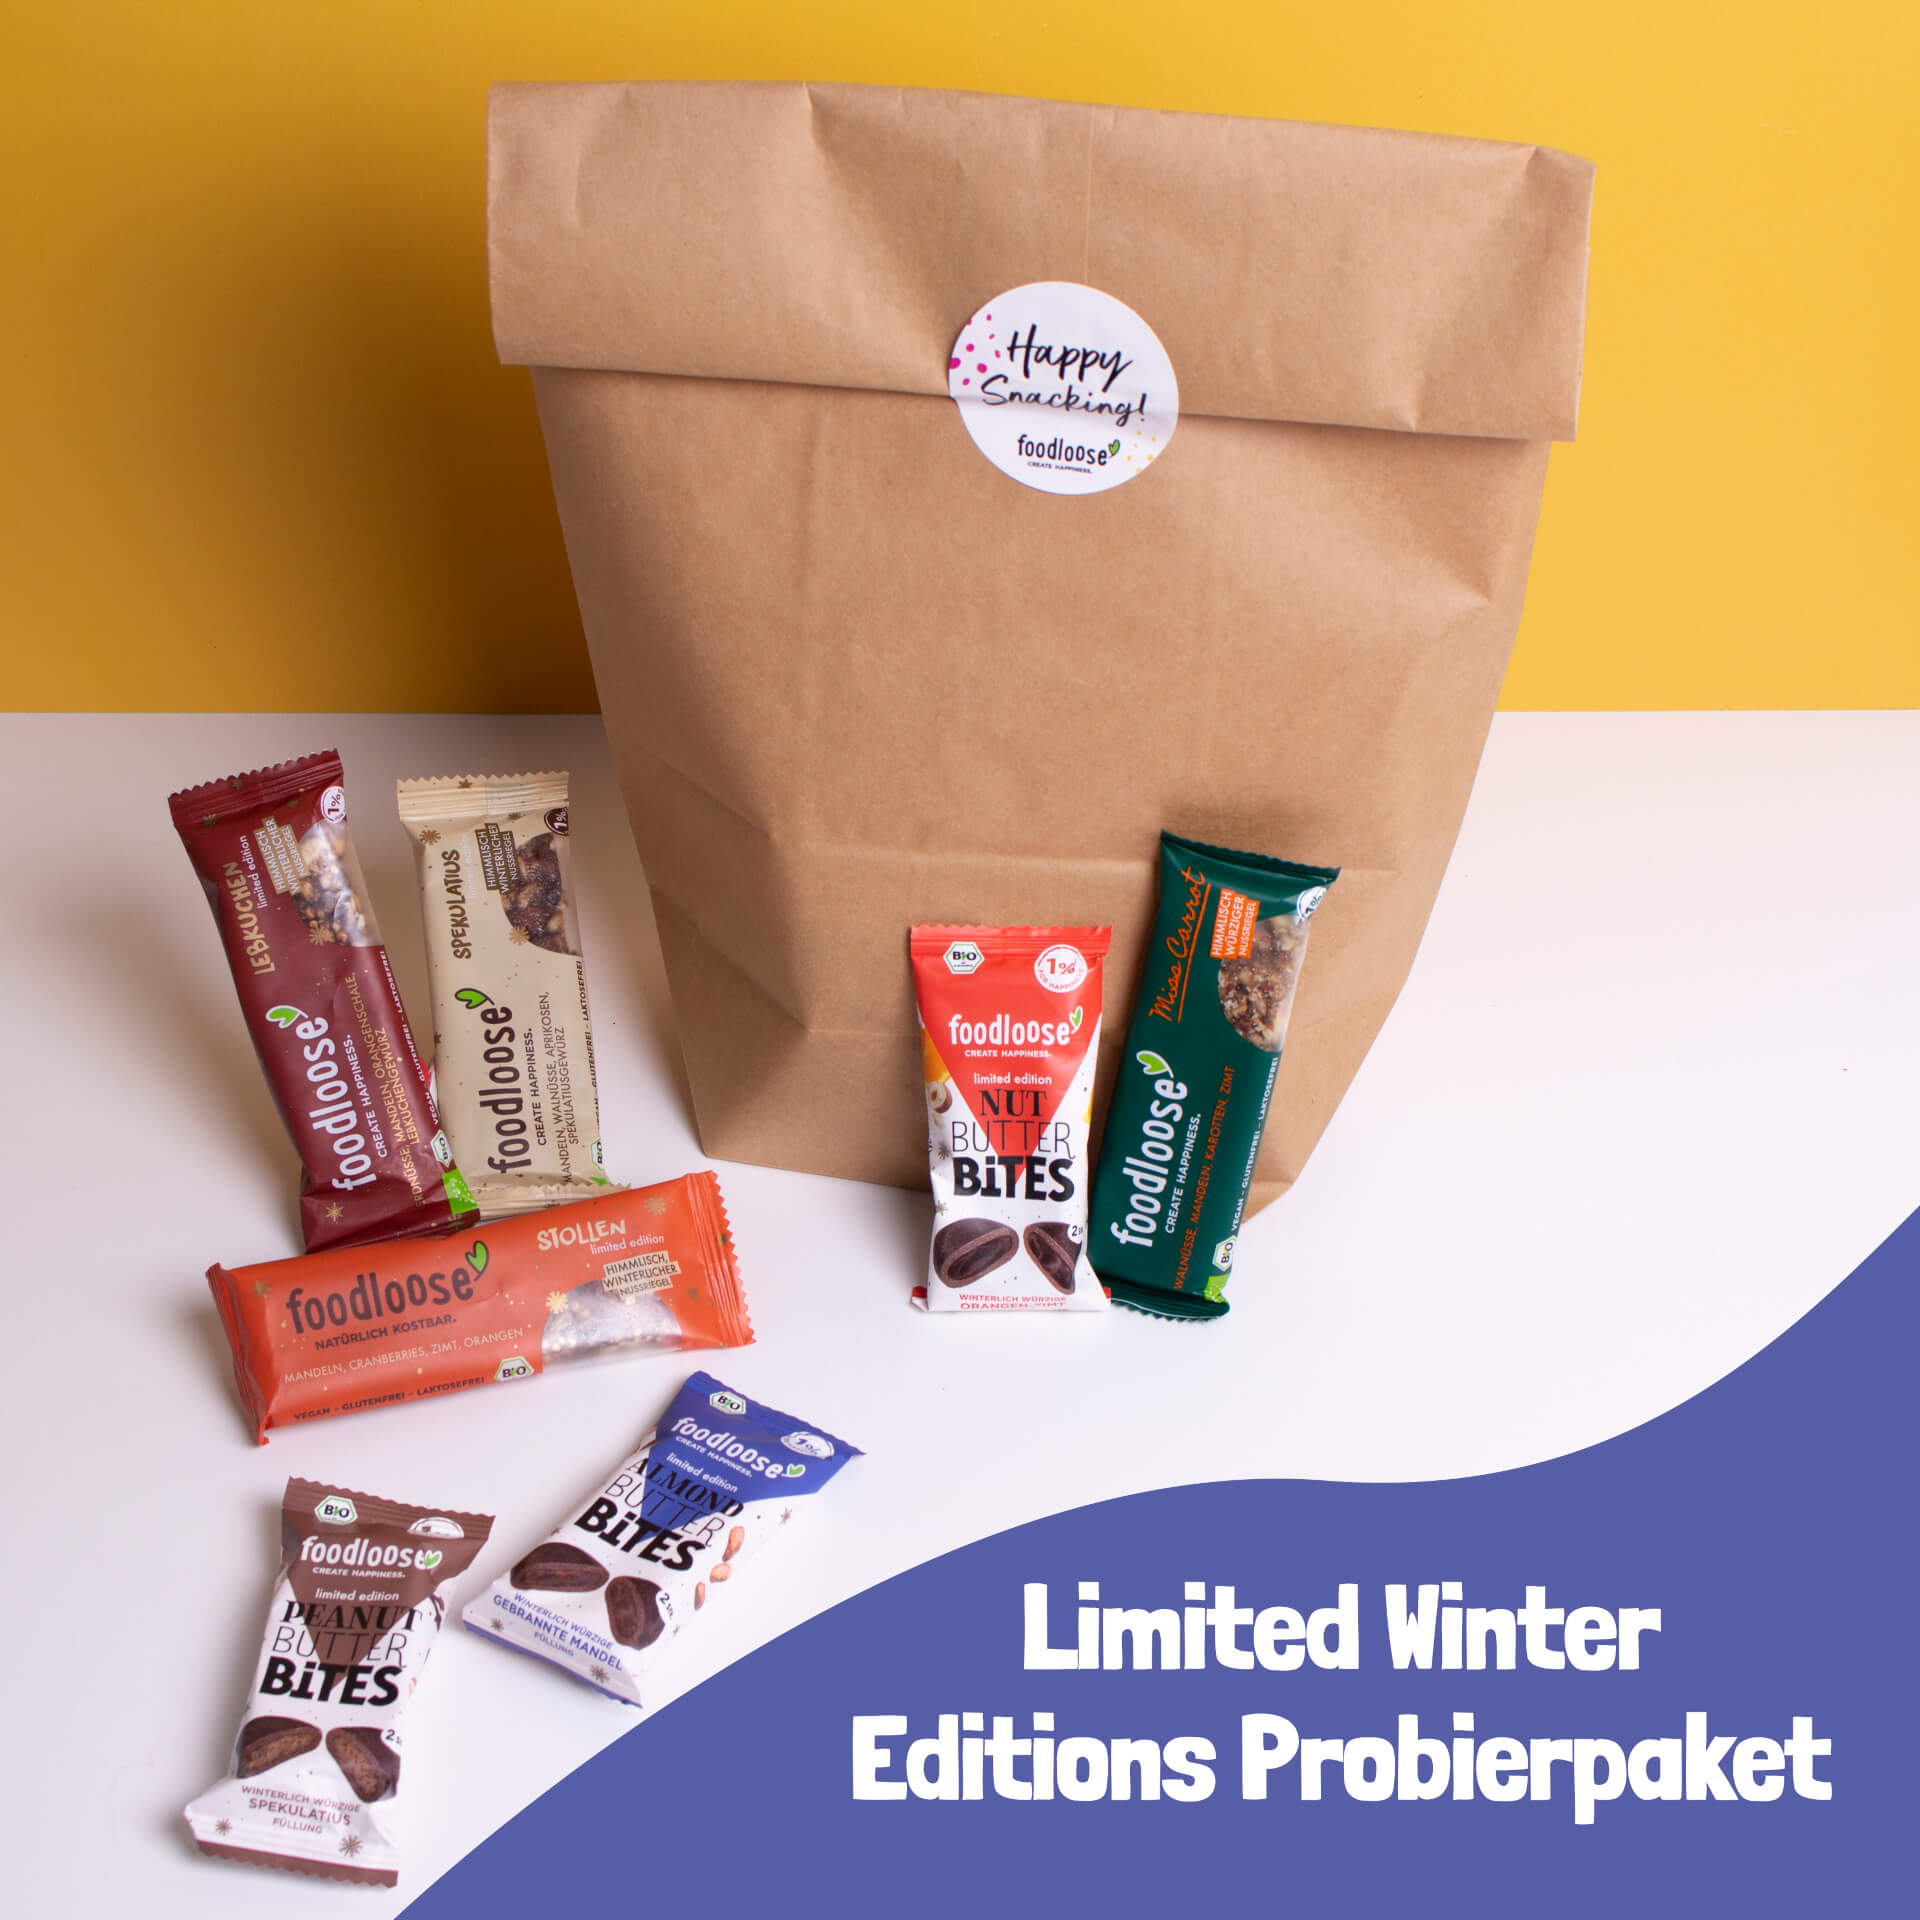 Limited Winter Editions Probierpaket